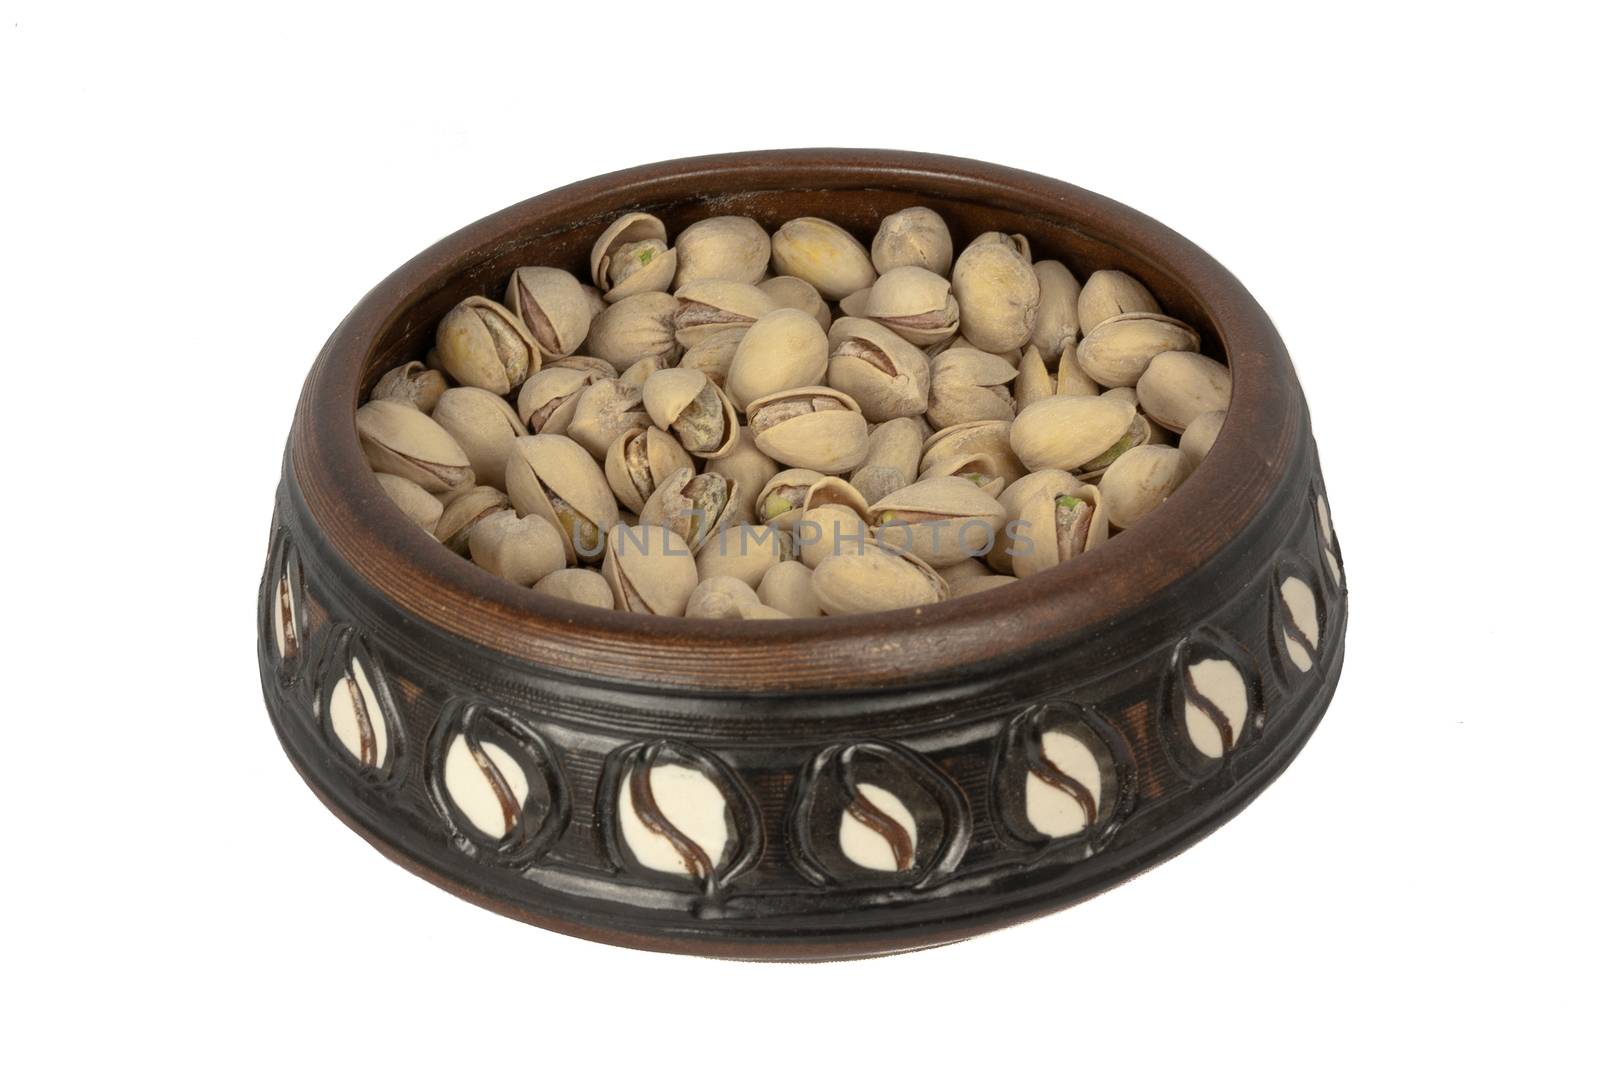 A Bowl Of Pistachios Isolated On A White Background